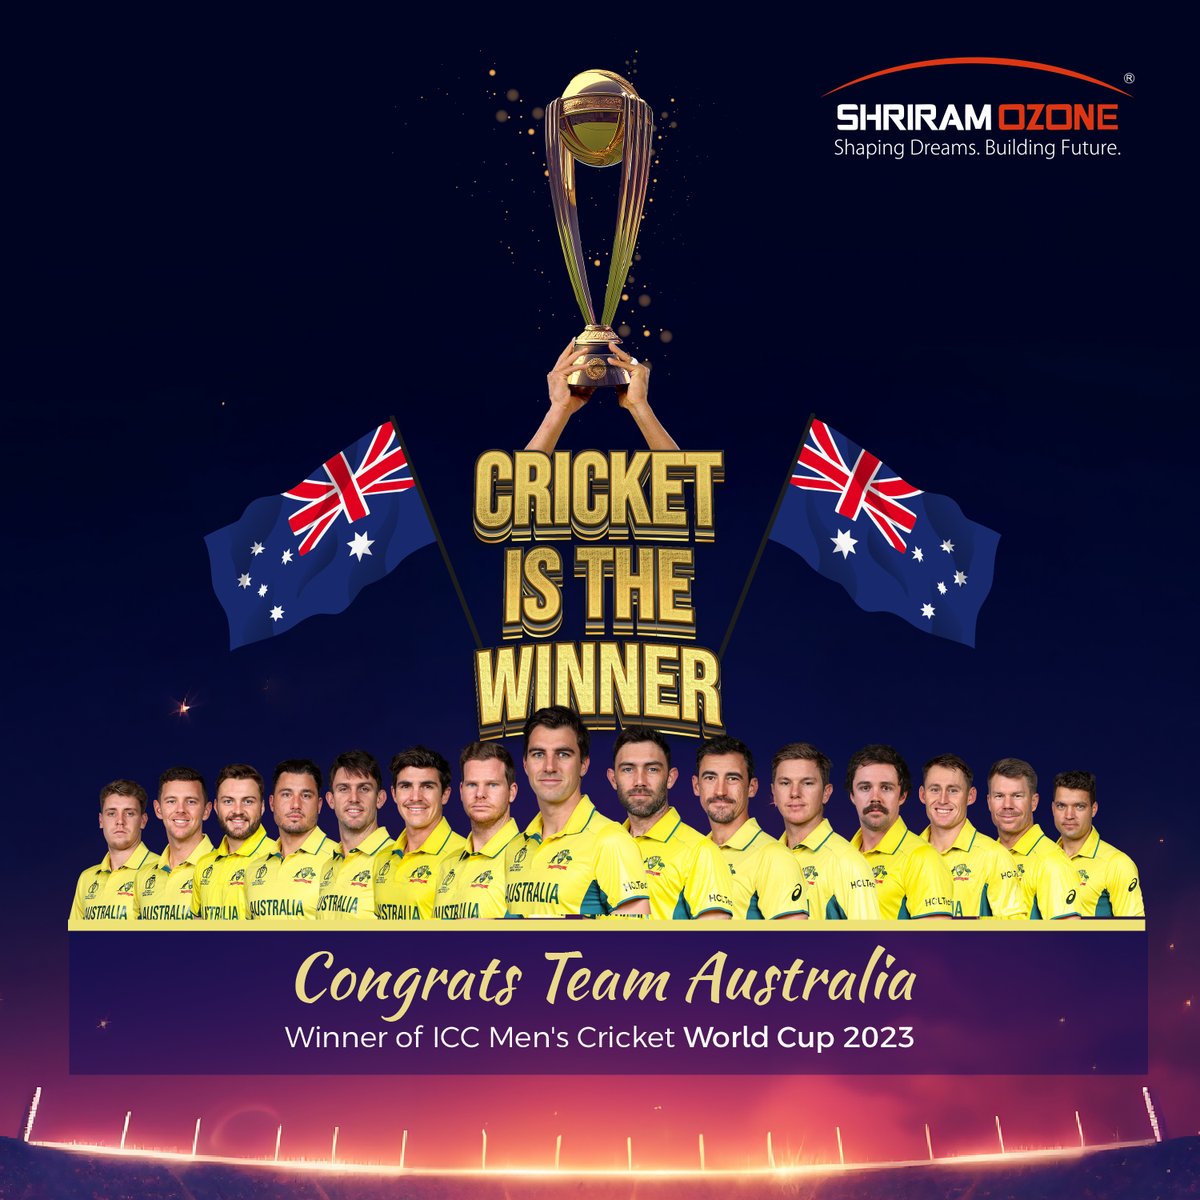 Congratulations 𝐀𝐮𝐬𝐭𝐫𝐚𝐥𝐢𝐚 on winning the ICC World Cup 2023! 🏆 Yet, India's cricket magic continues to inspire fans worldwide - A tournament of solid brilliance by 𝐓𝐞𝐚𝐦 𝐈𝐧𝐝𝐢𝐚.

#australia #indians #australianstyle #cricketfans #iccworldcup2023 #australiaindia